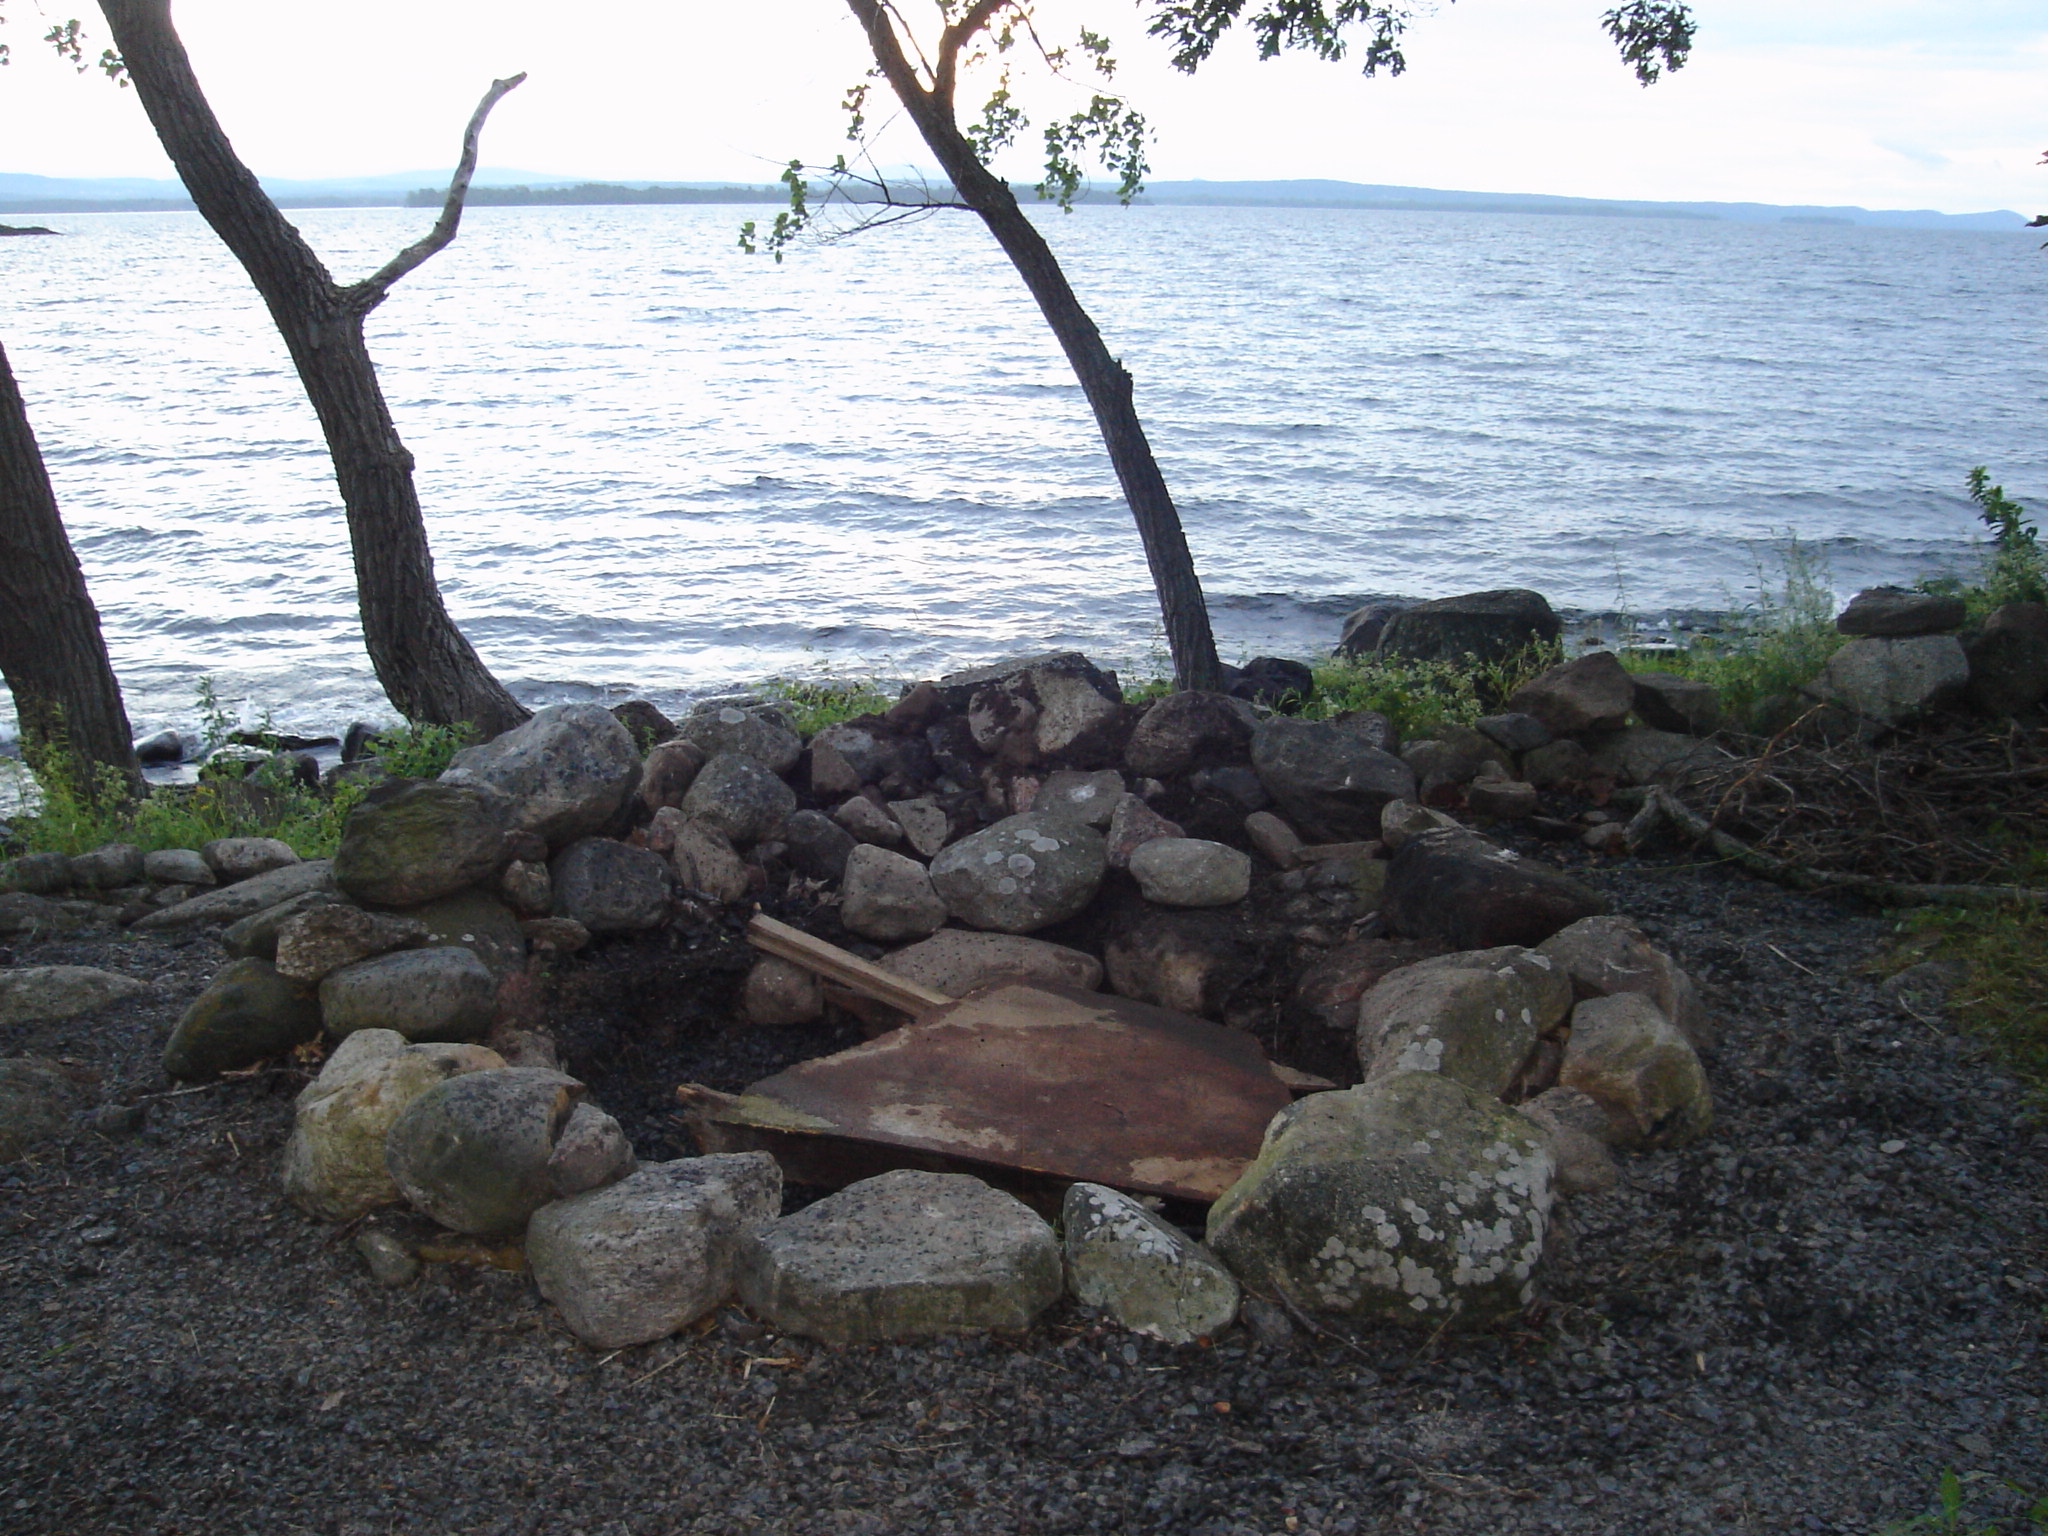 Our fire ring on the island